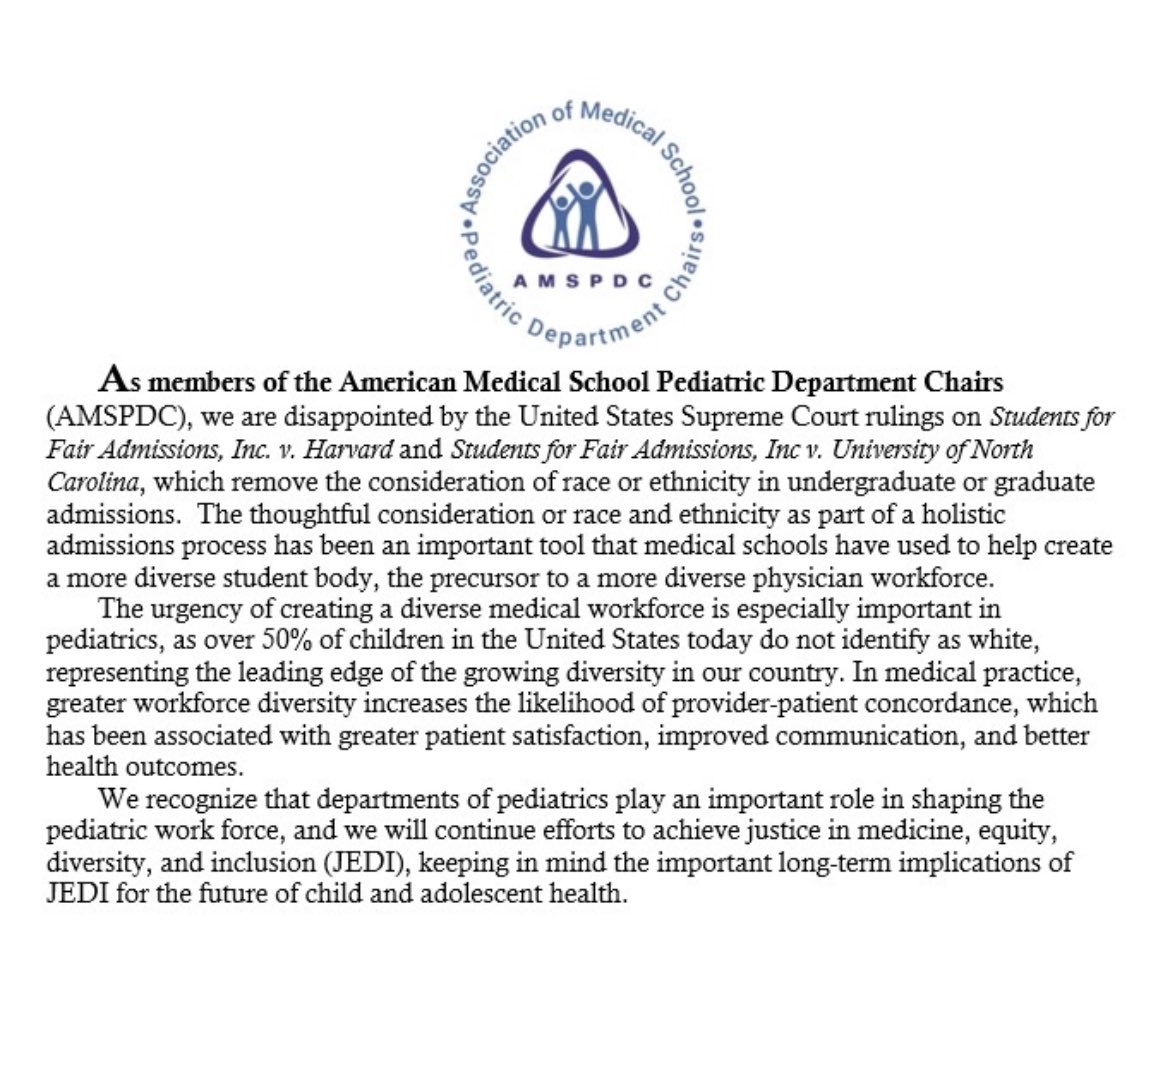 Statement from the American Medical School Pediatric Department Chairs (@amspdc) regarding the recent #SupremeCourt decisions re: #AffirmativeAction. @MontefiorePeds @EinsteinMed @SuzettePediMD AMSPDC.org